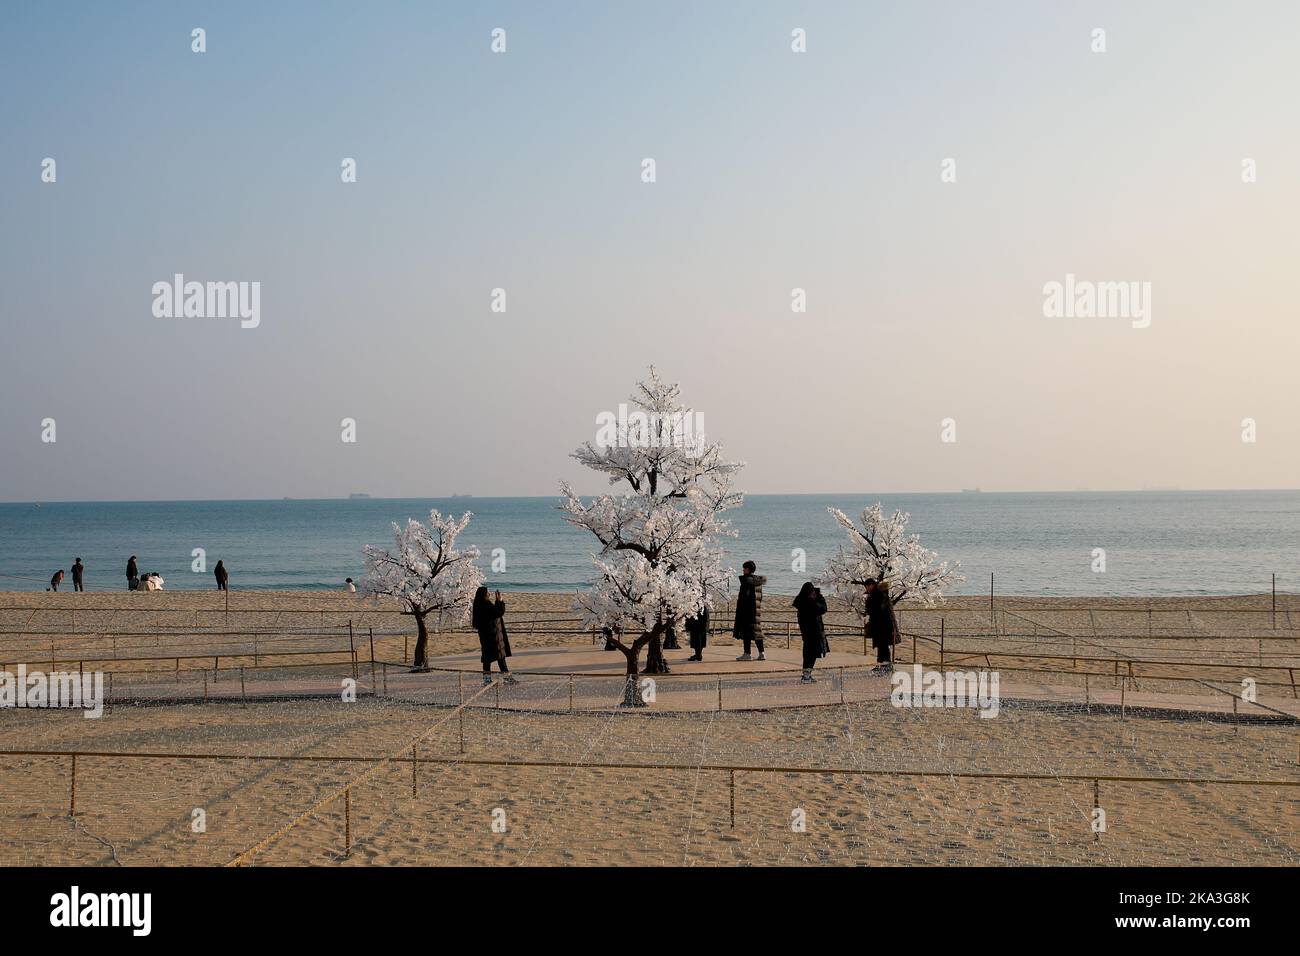 A view of the Christmas art installation of white trees on a sandy beach in Busan, South Korea Stock Photo